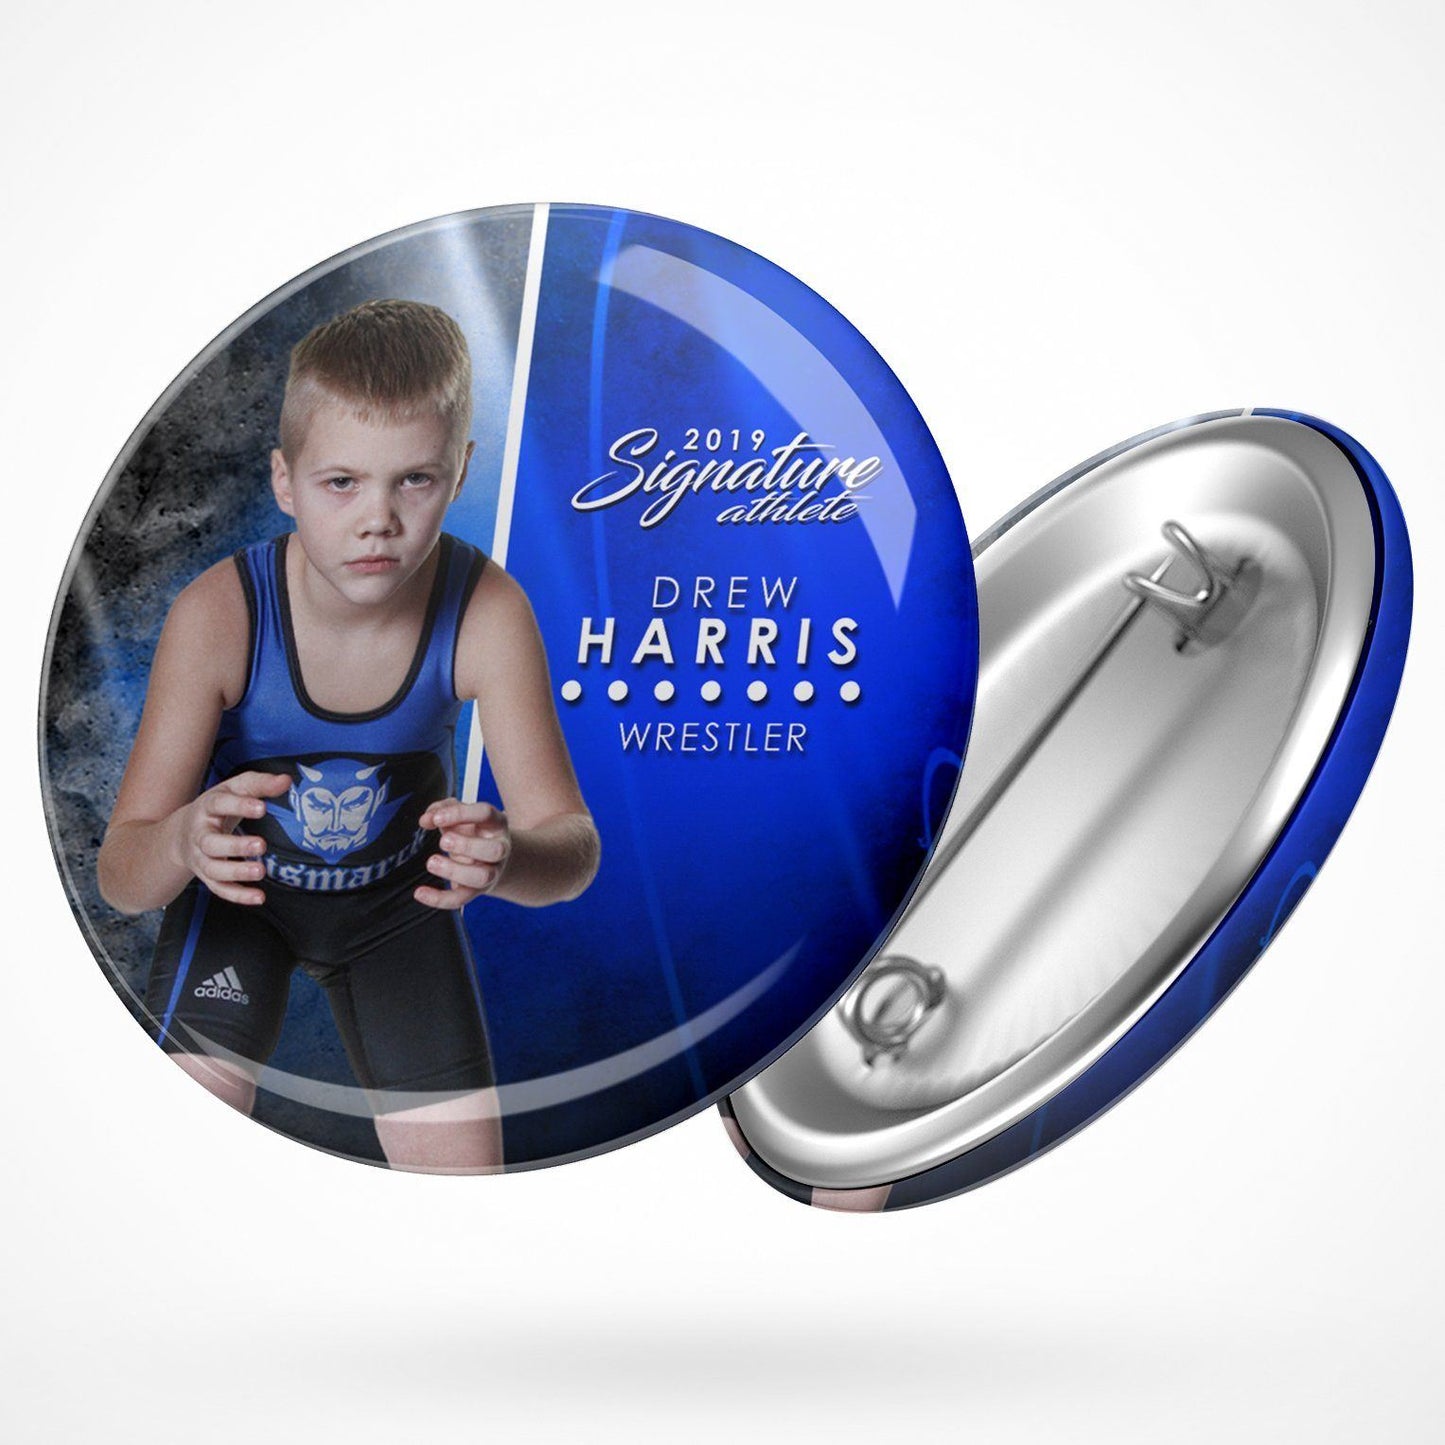 Signature Player - Wrestling - V1 - Extraction Button Template-Photoshop Template - Photo Solutions